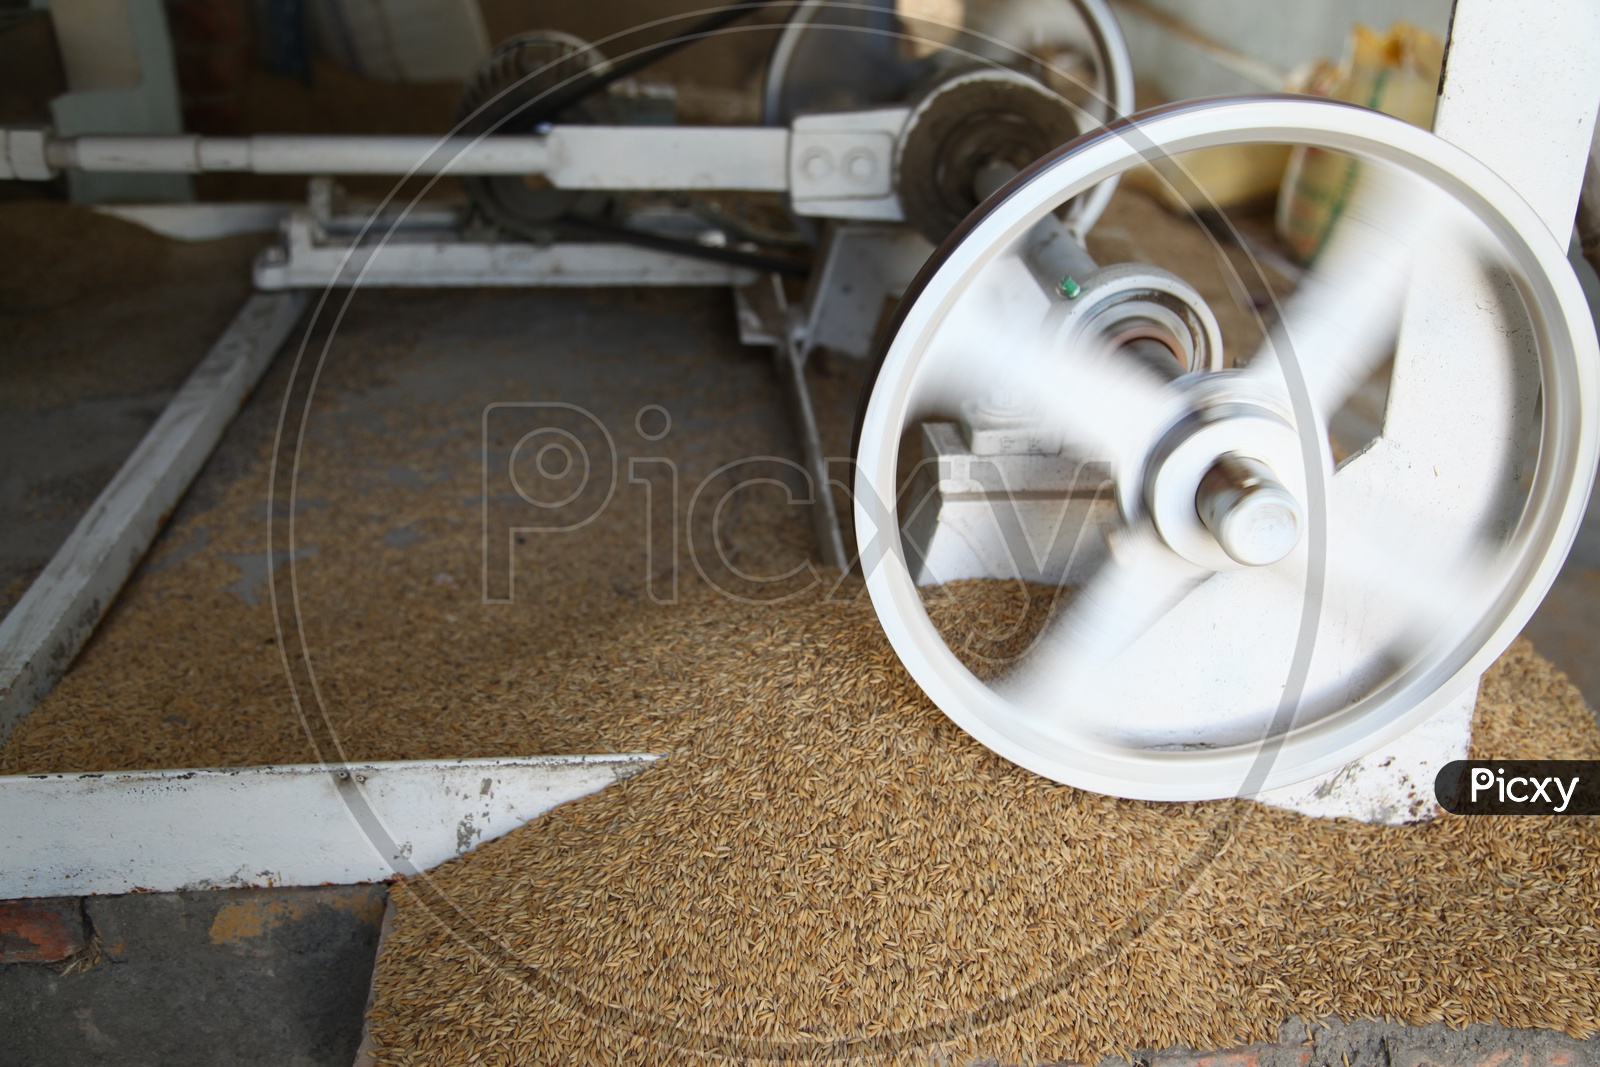 Processing Paddy in a rice mill